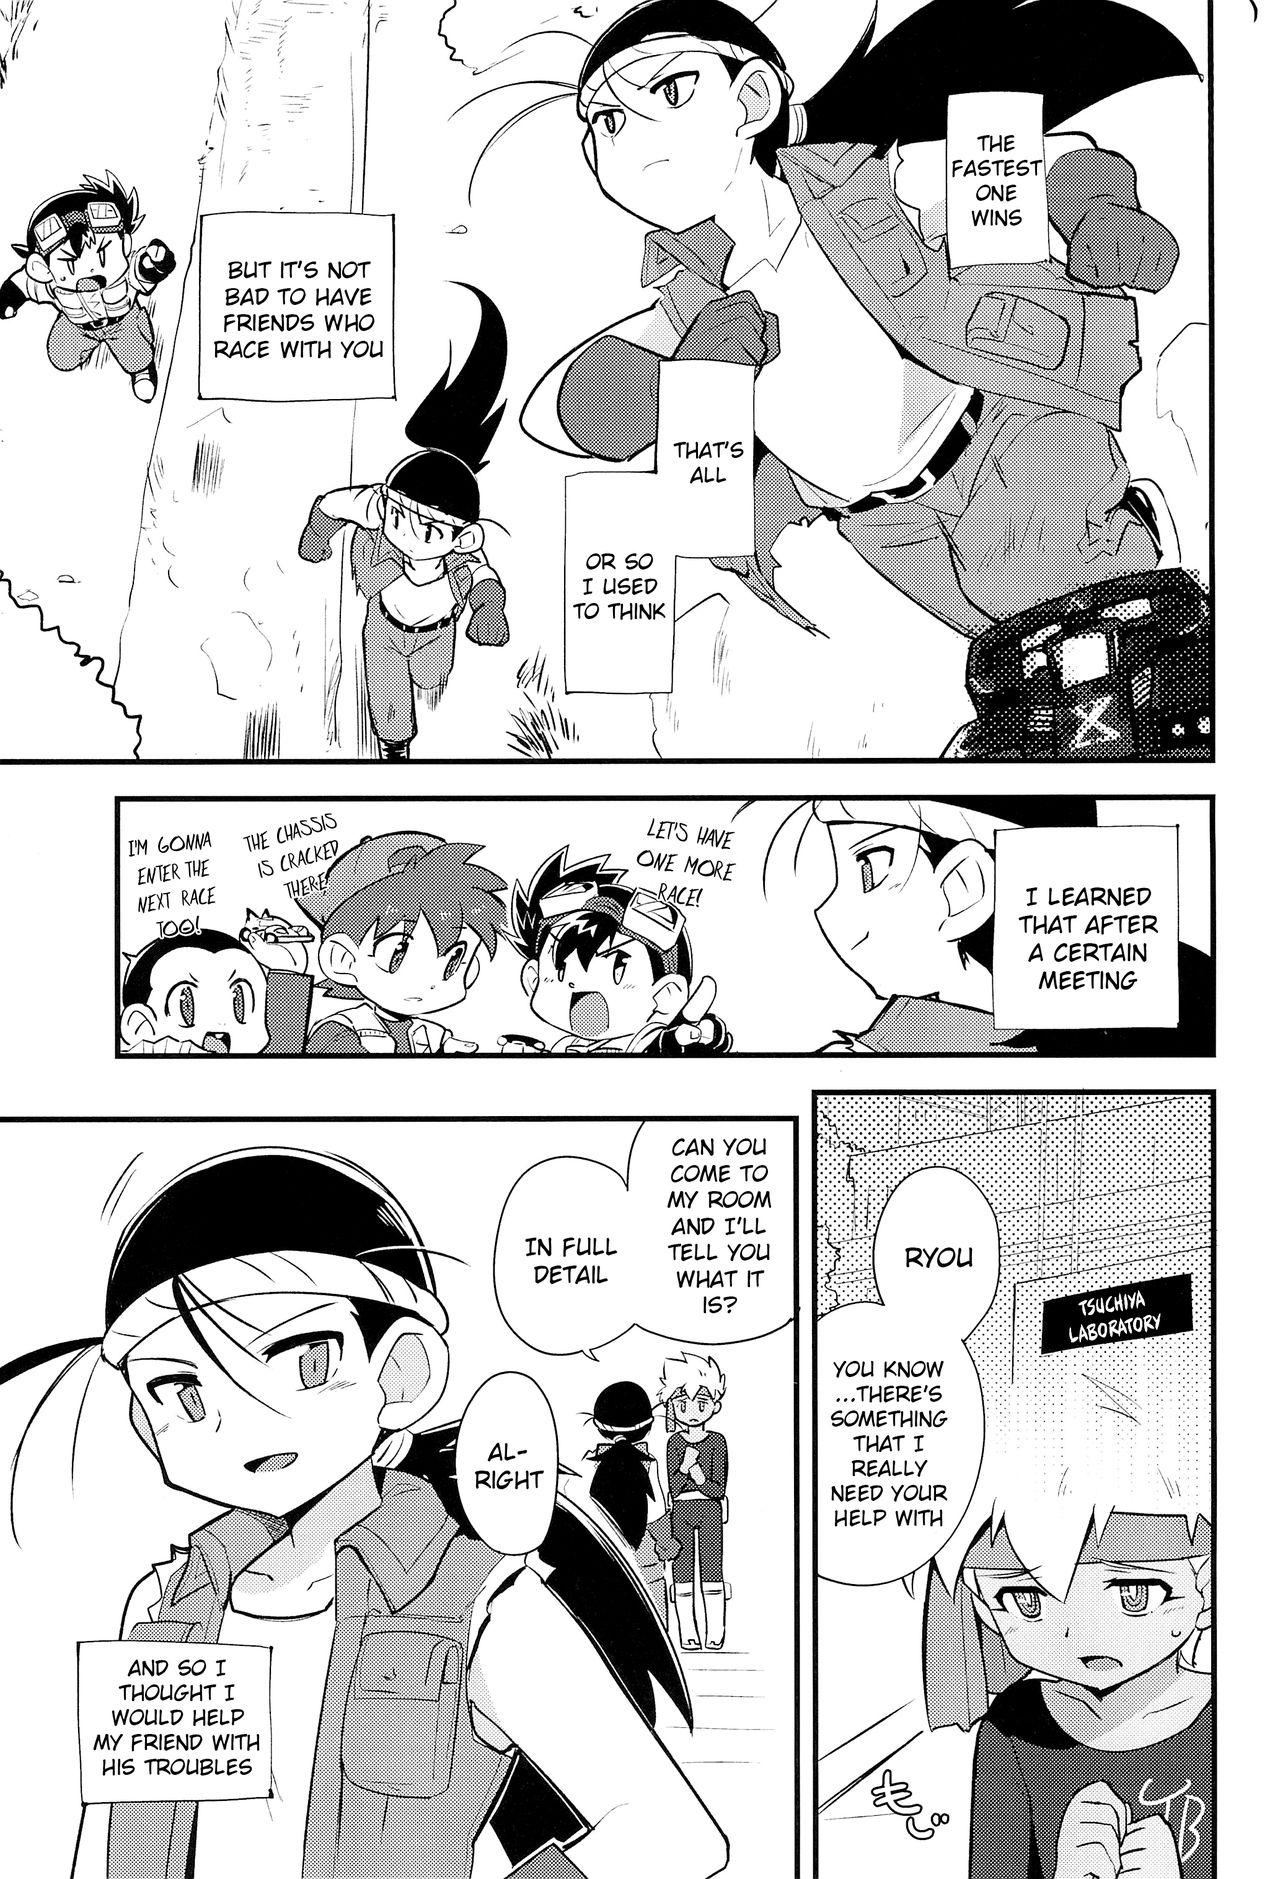 Lesbians Try Shichau? | Wanna Try It? - Bakusou kyoudai lets and go Swallowing - Page 2